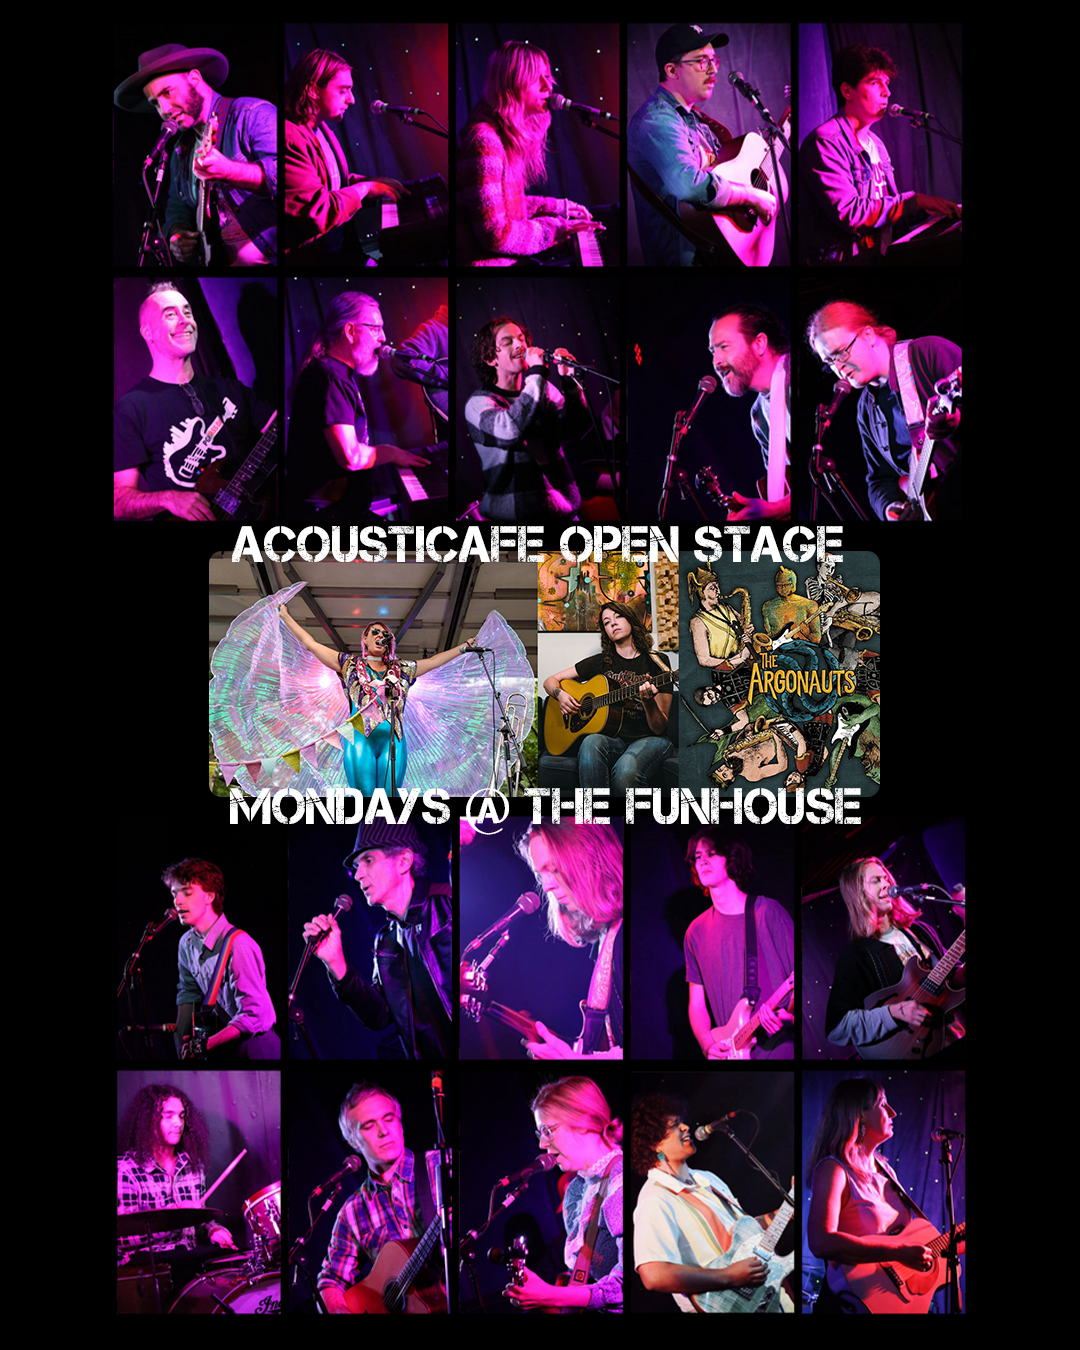 AcoustiCafe Open Stage every Monday at The Funhouse at Mr Smalls